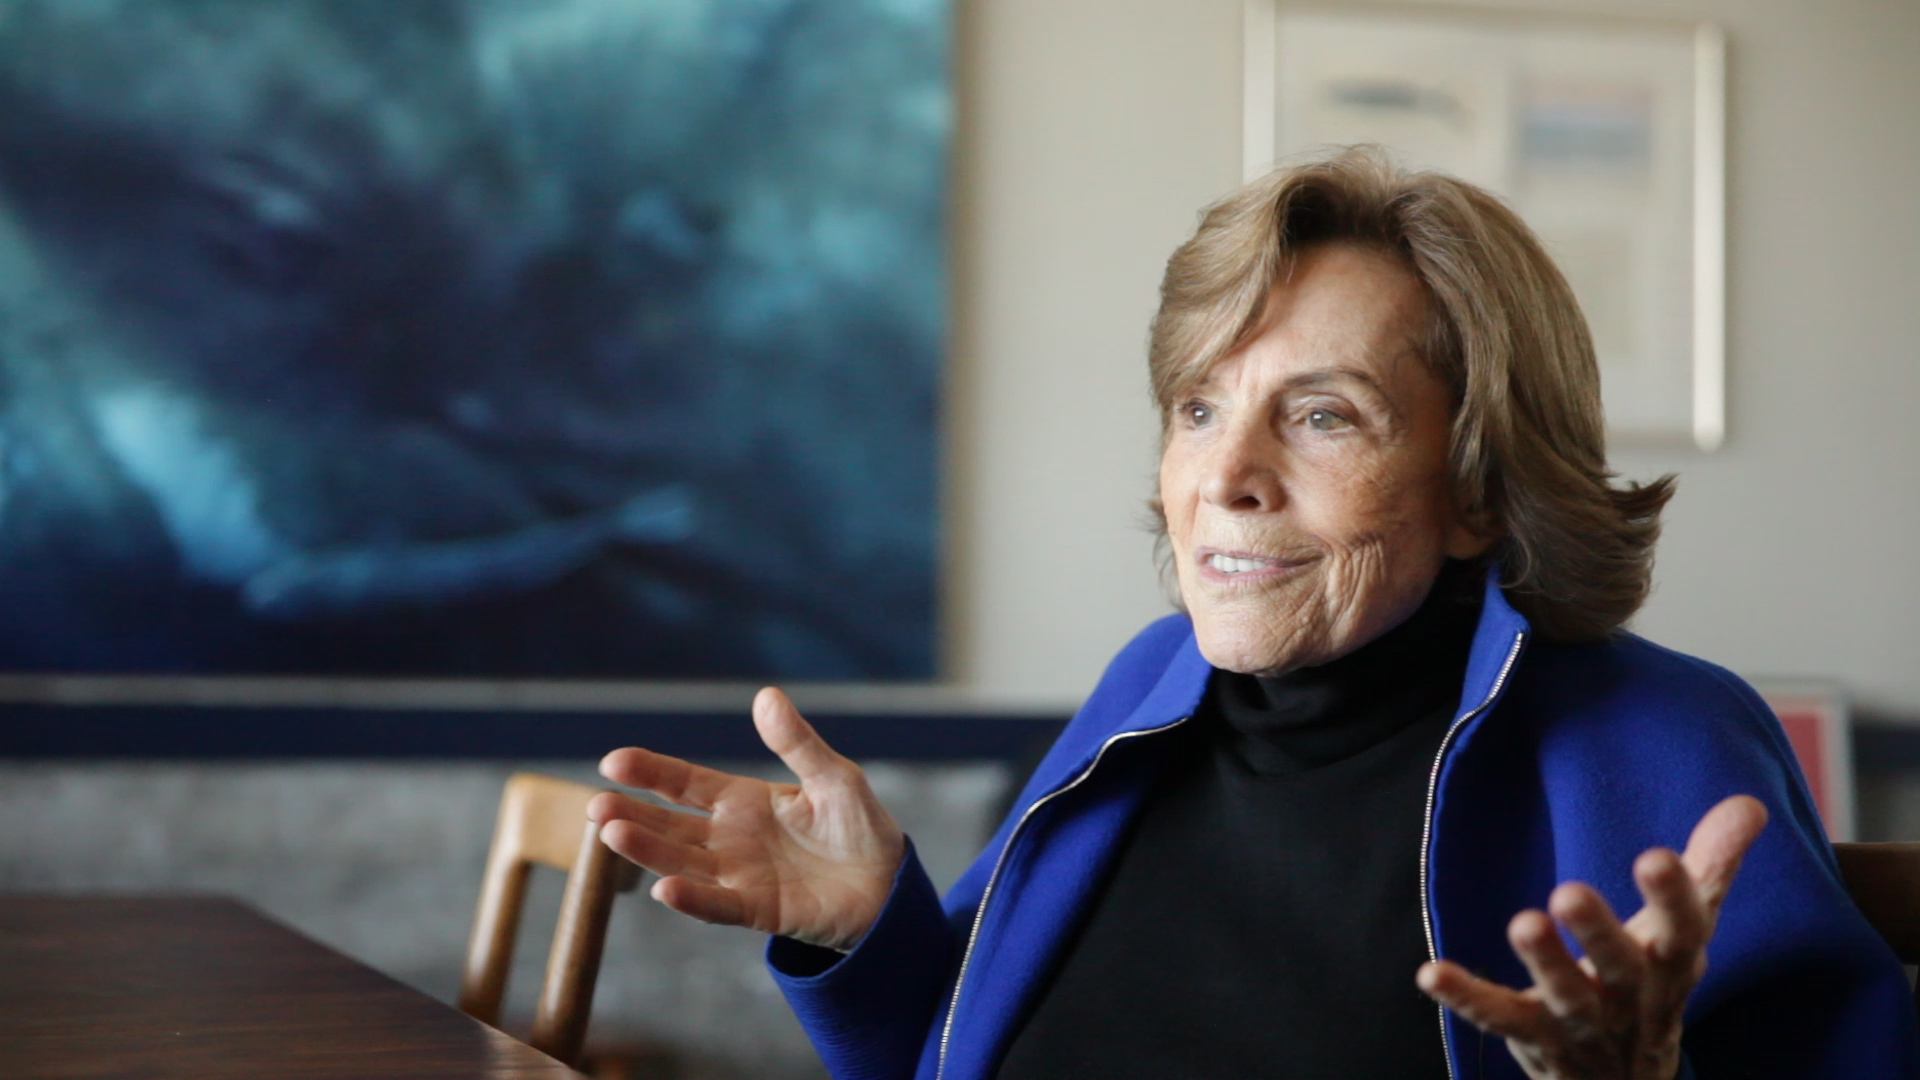 Sylvia Earle, in a film still from "Better Together" (2019)